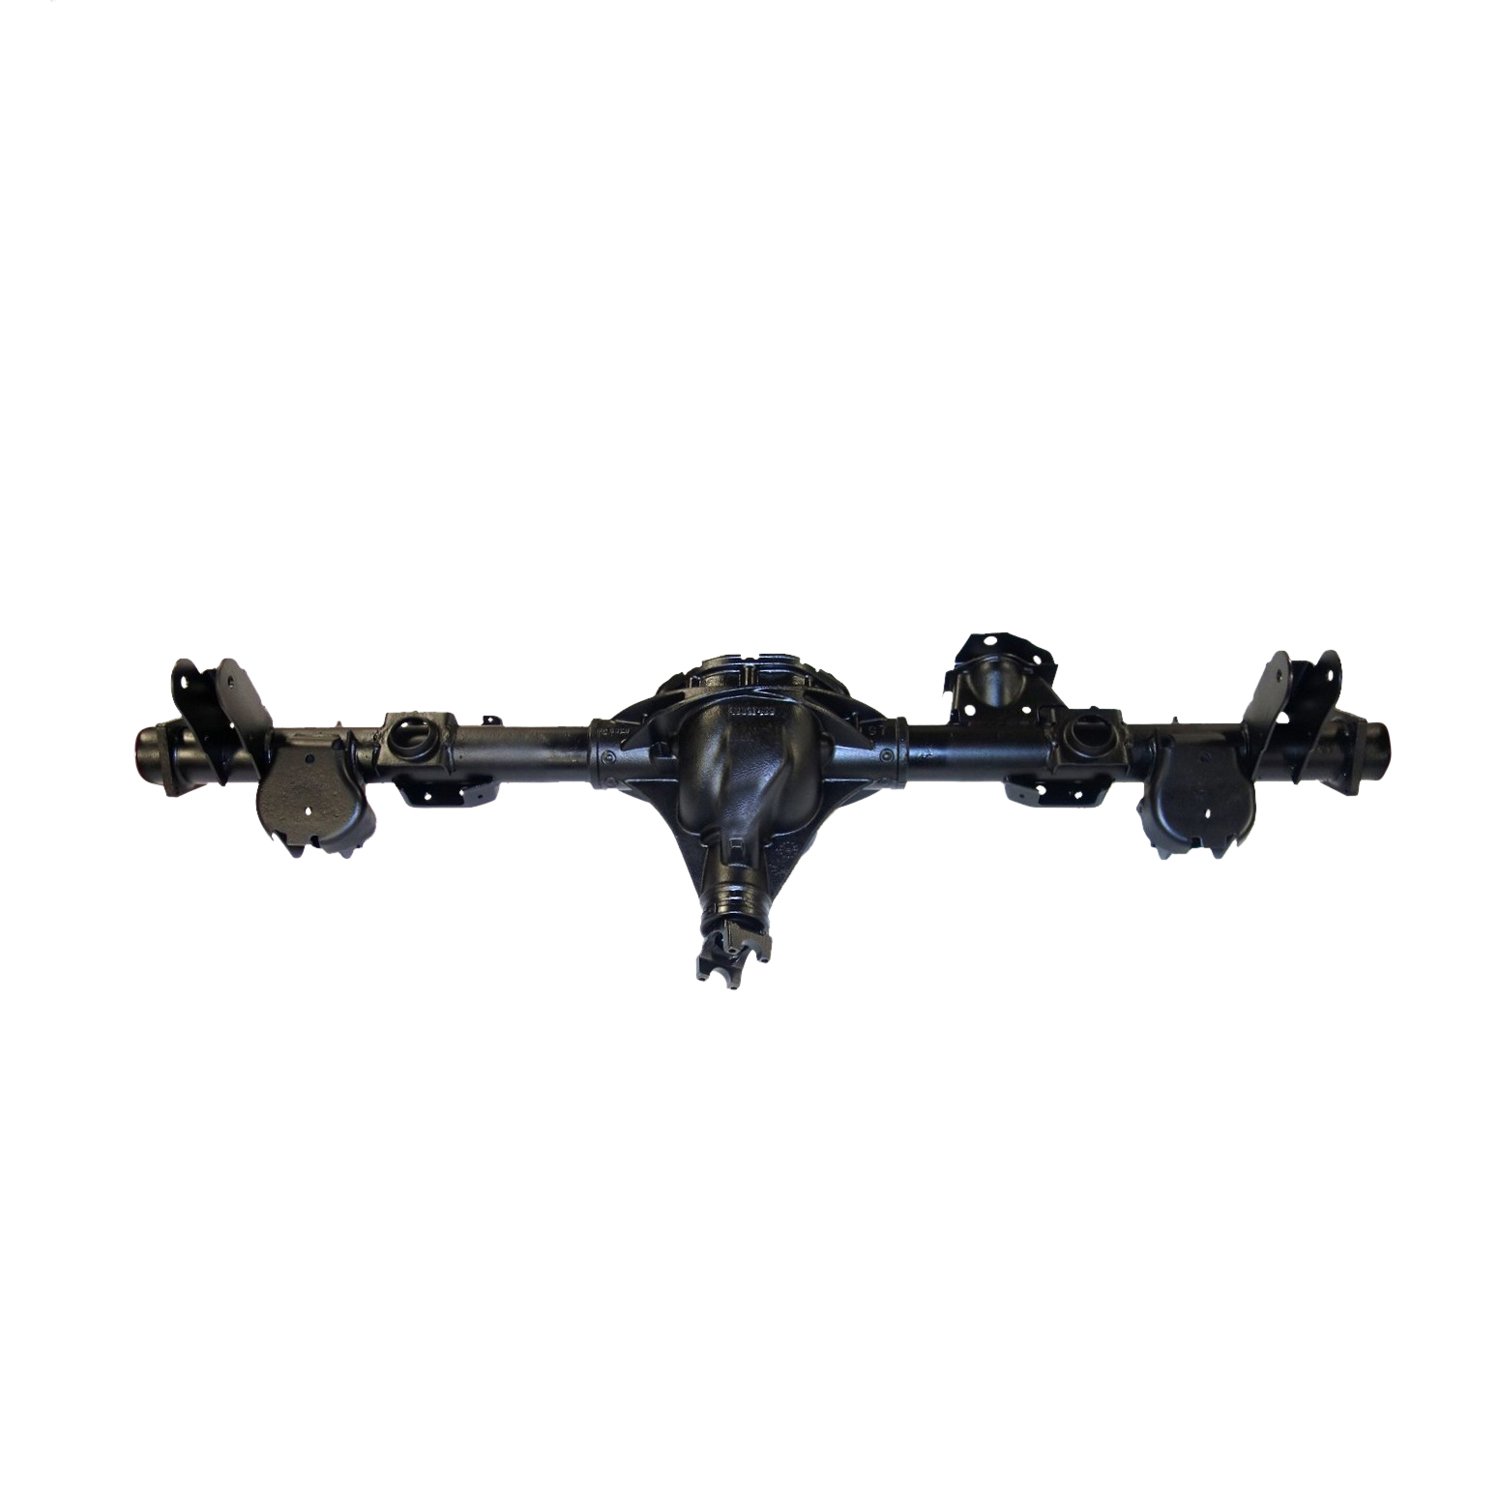 Remanufactured Axle Assembly for GM 8.6" 2007-08 GM Suburban 1500, 3.23 Rato, Posi